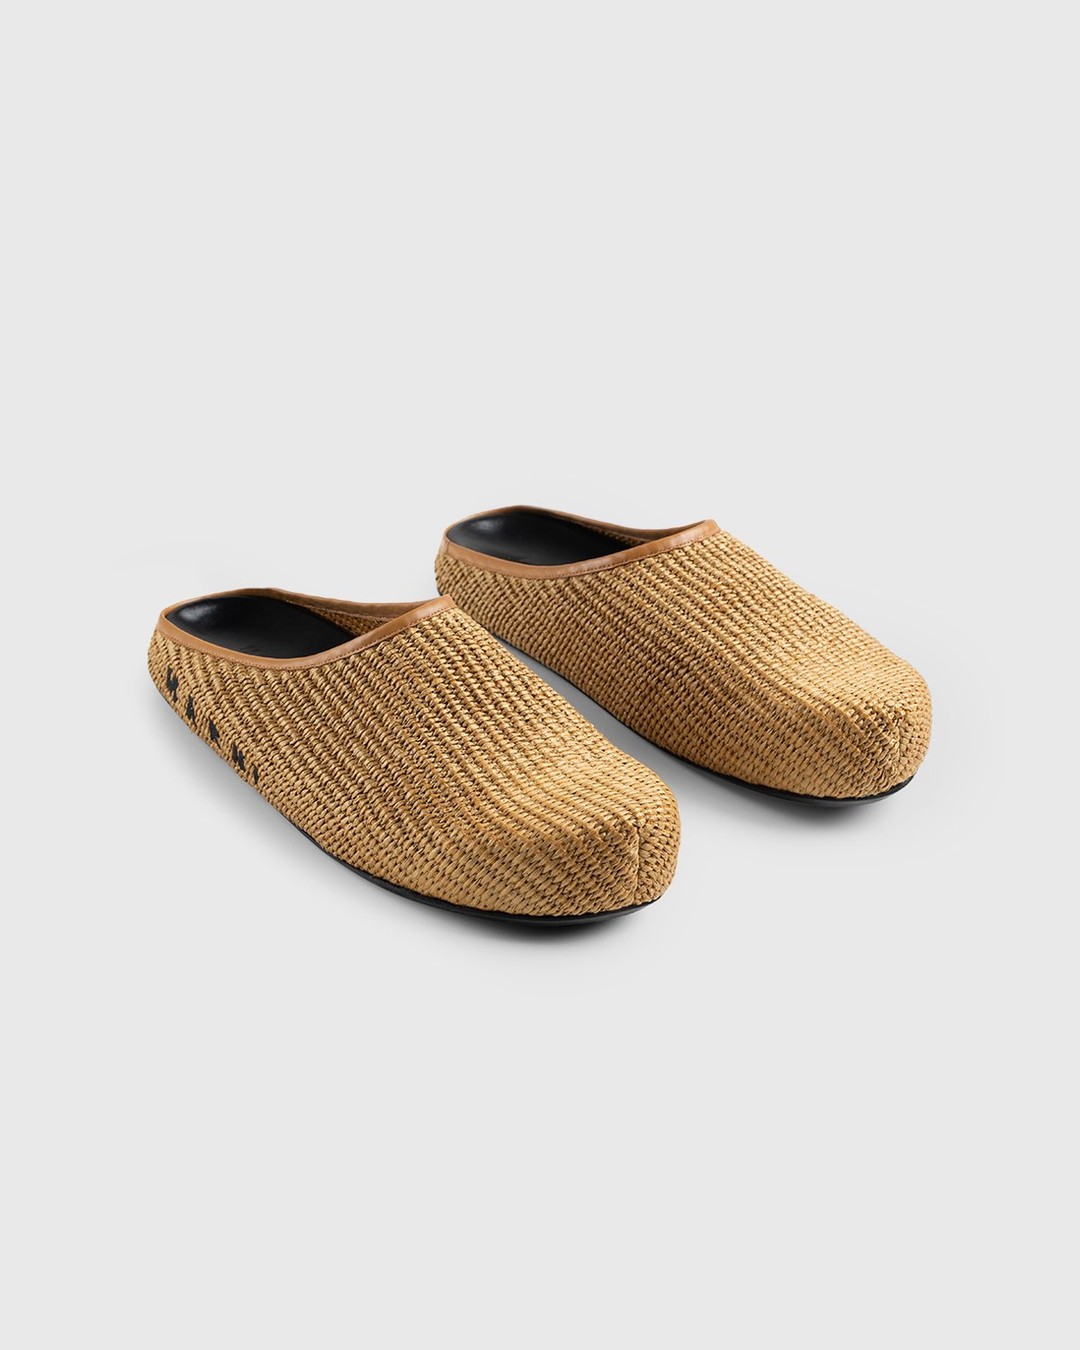 Marni – Woven Raffia and Leather Mules Brown/Black - Shoes - Brown - Image 3